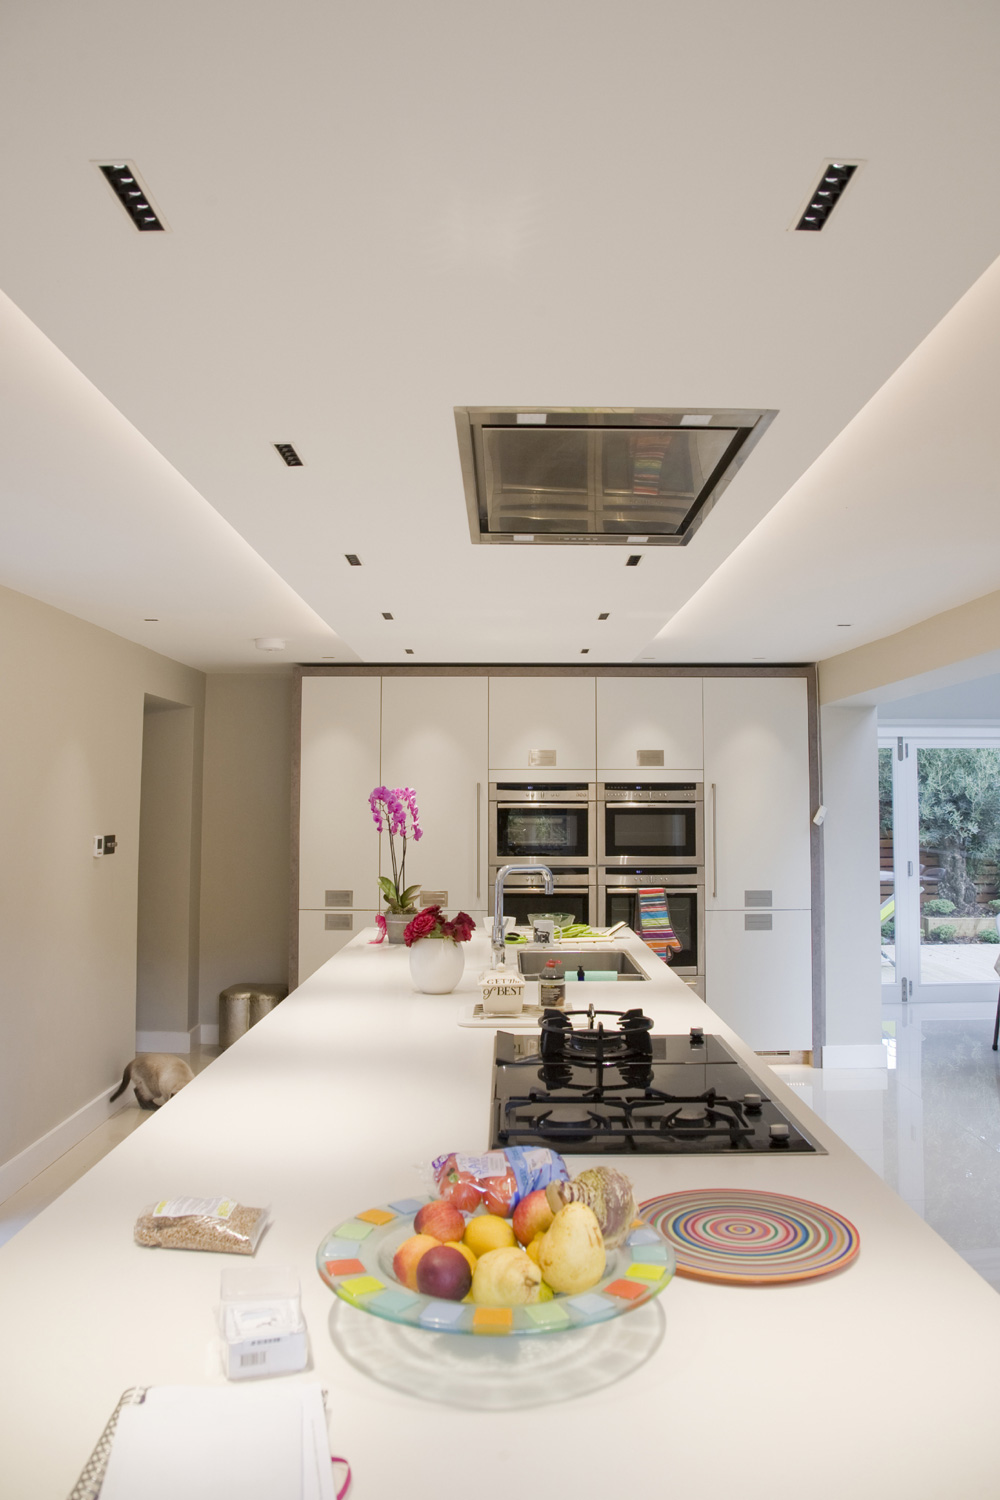 Recessed LED downlights